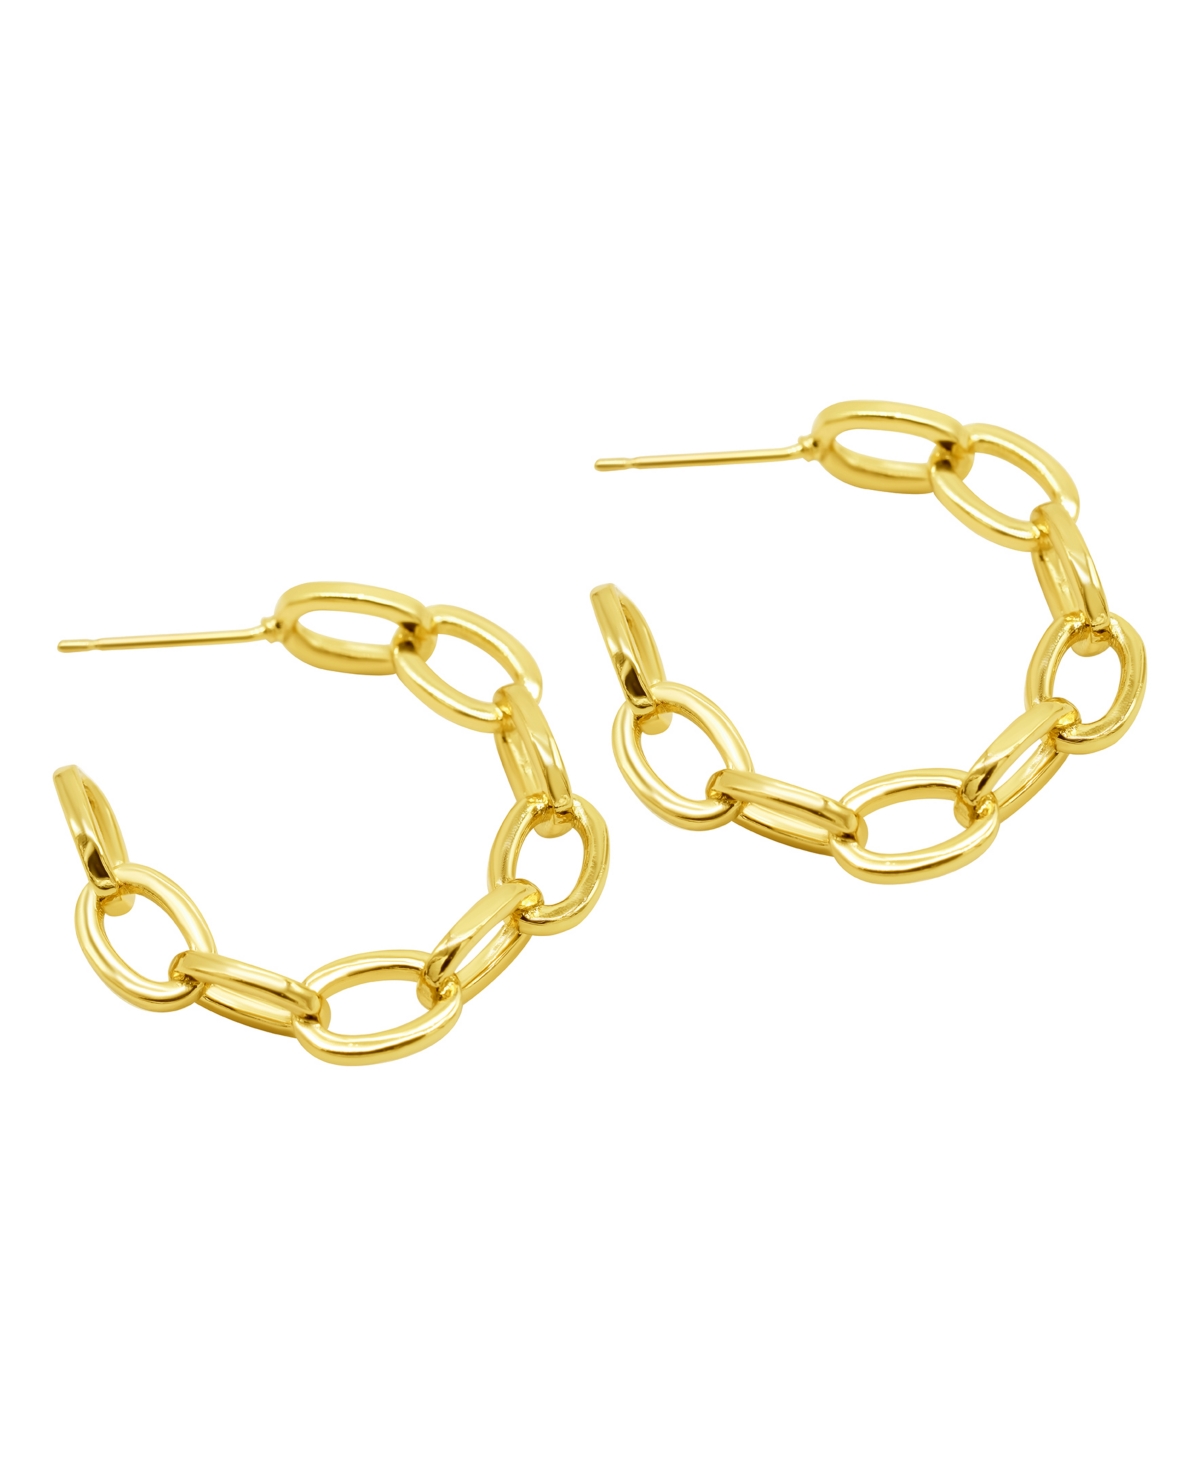 Shop Adornia 14k Gold-plated Chain Link Hoop Earrings